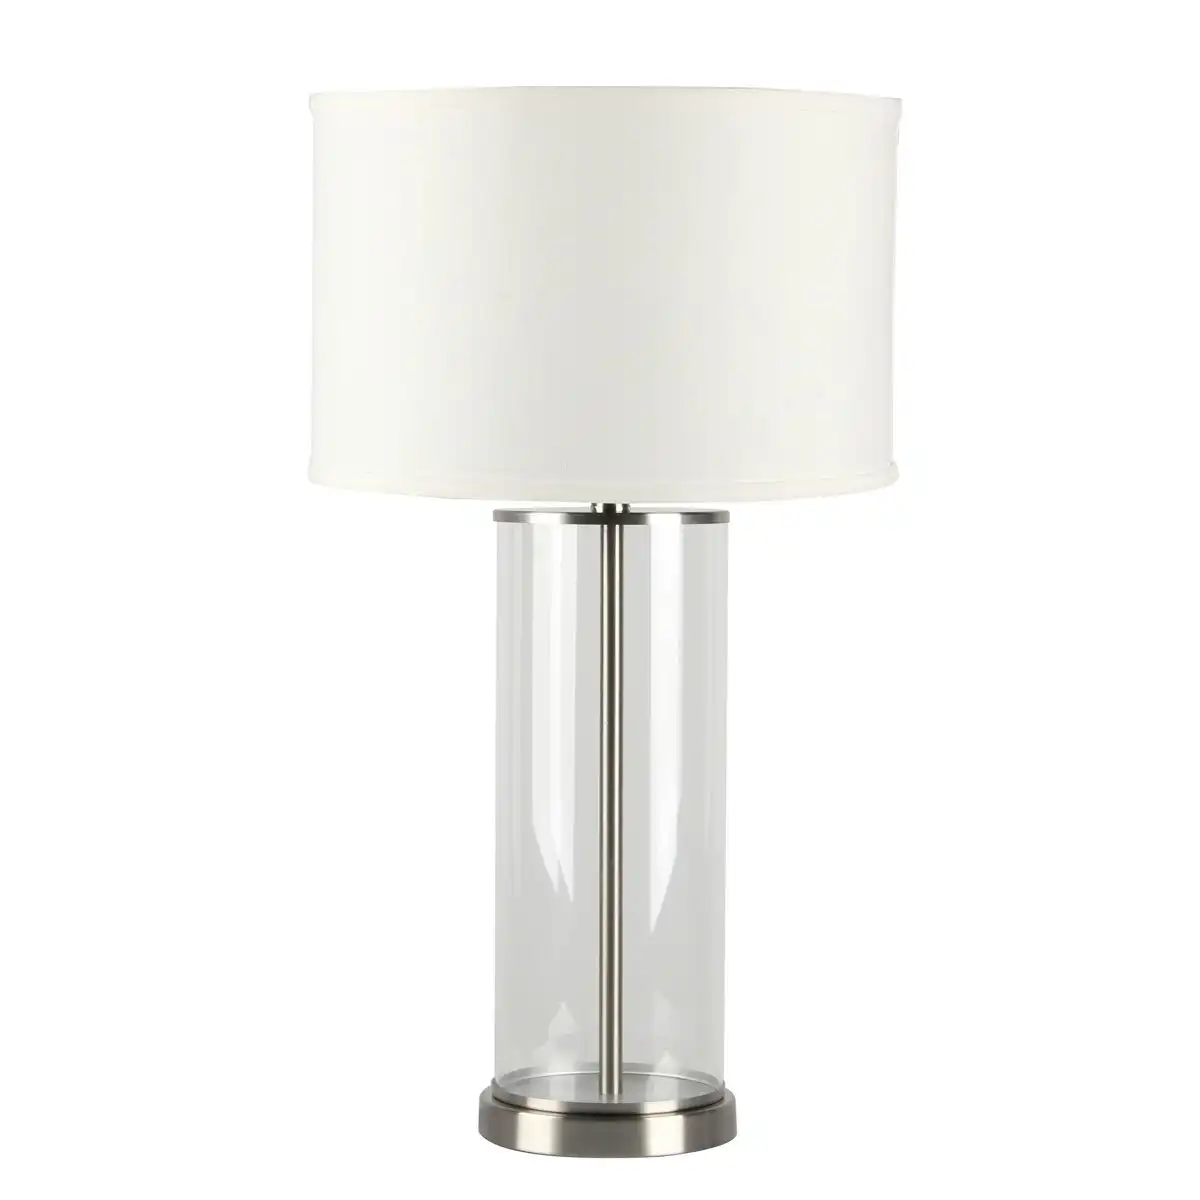 Cafe Lighting Left Bank Table Lamp - Nickel with White Shade